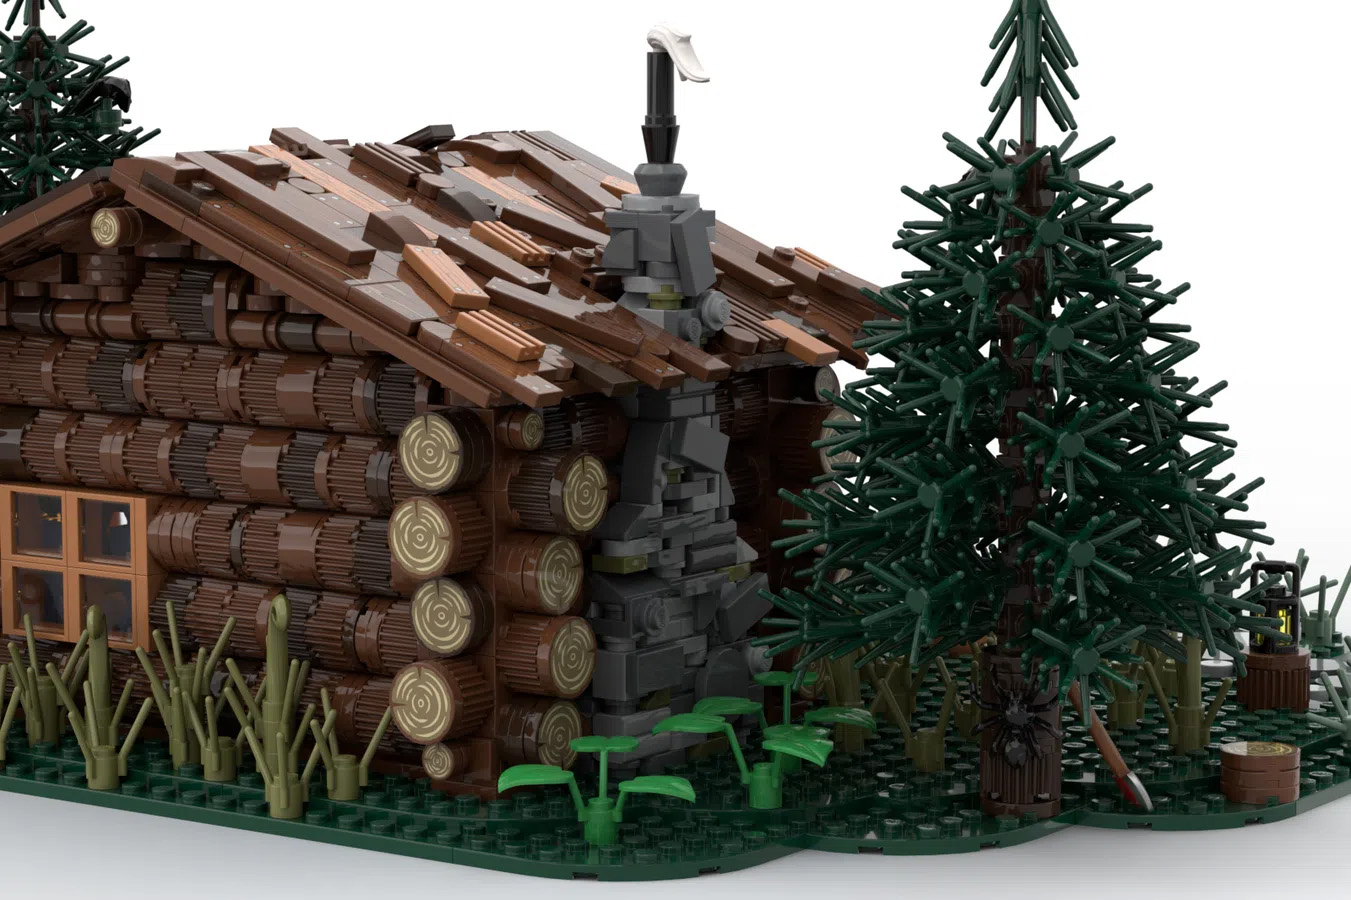 LOG CABIN Achieves 10K Support on LEGO IDEAS